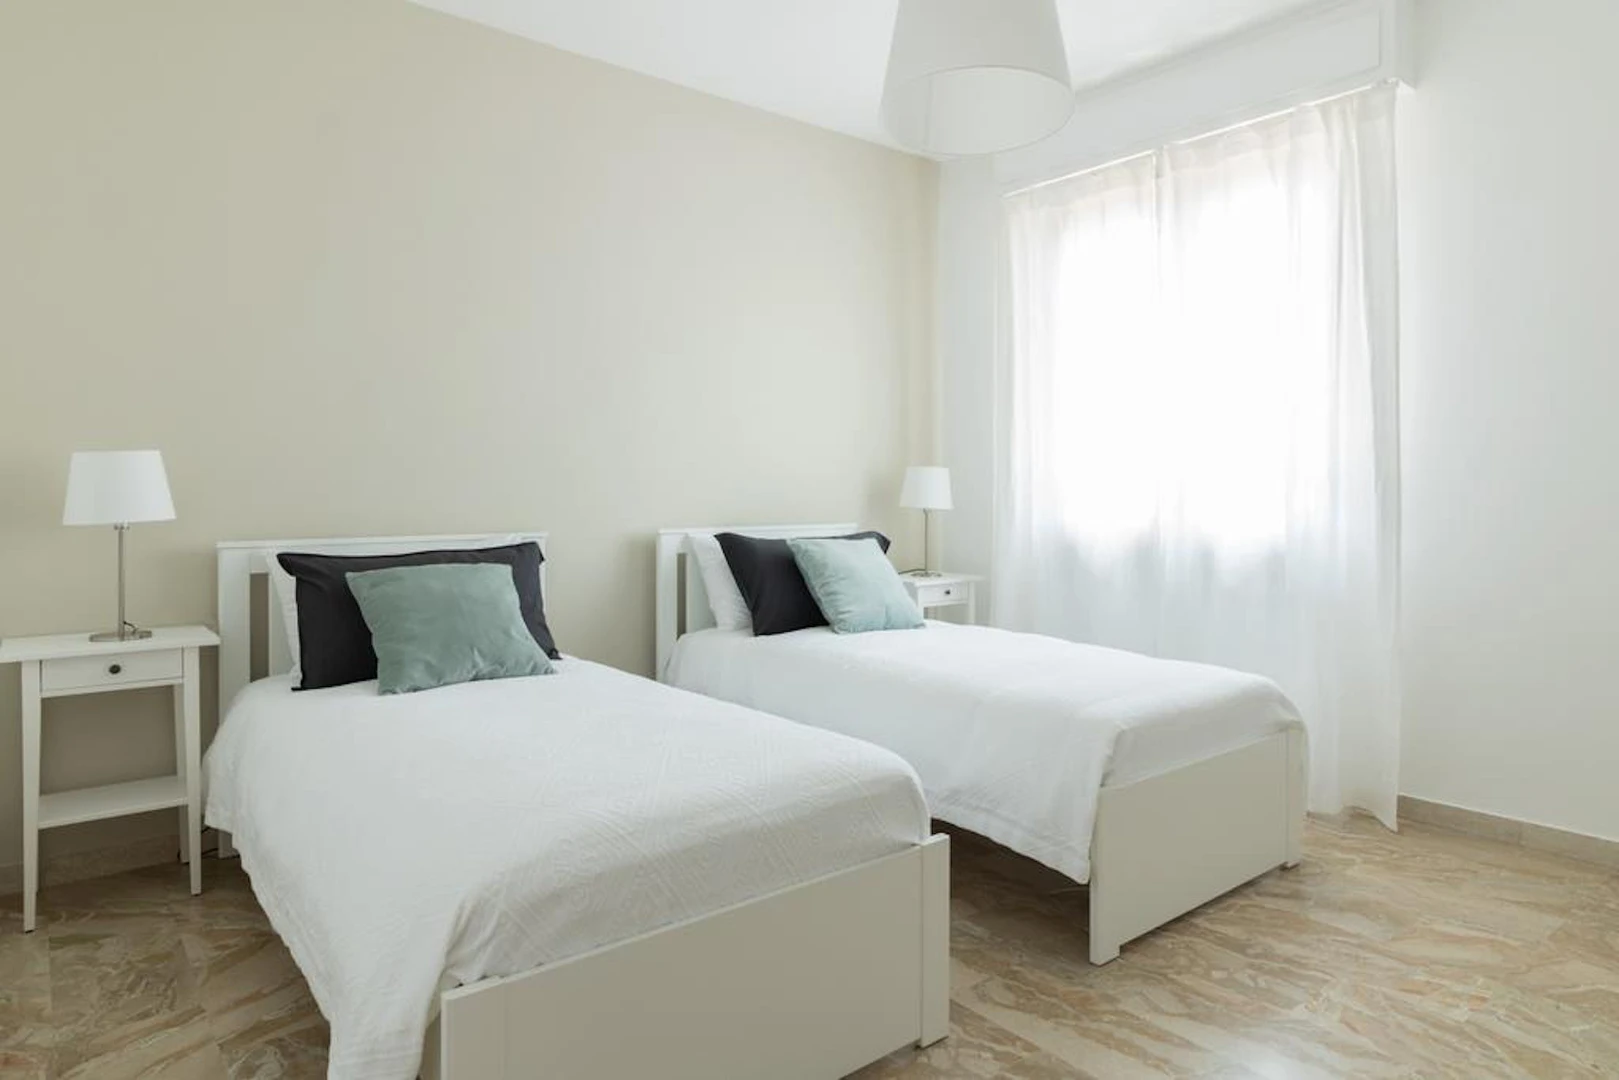 Accommodation in the centre of Verona